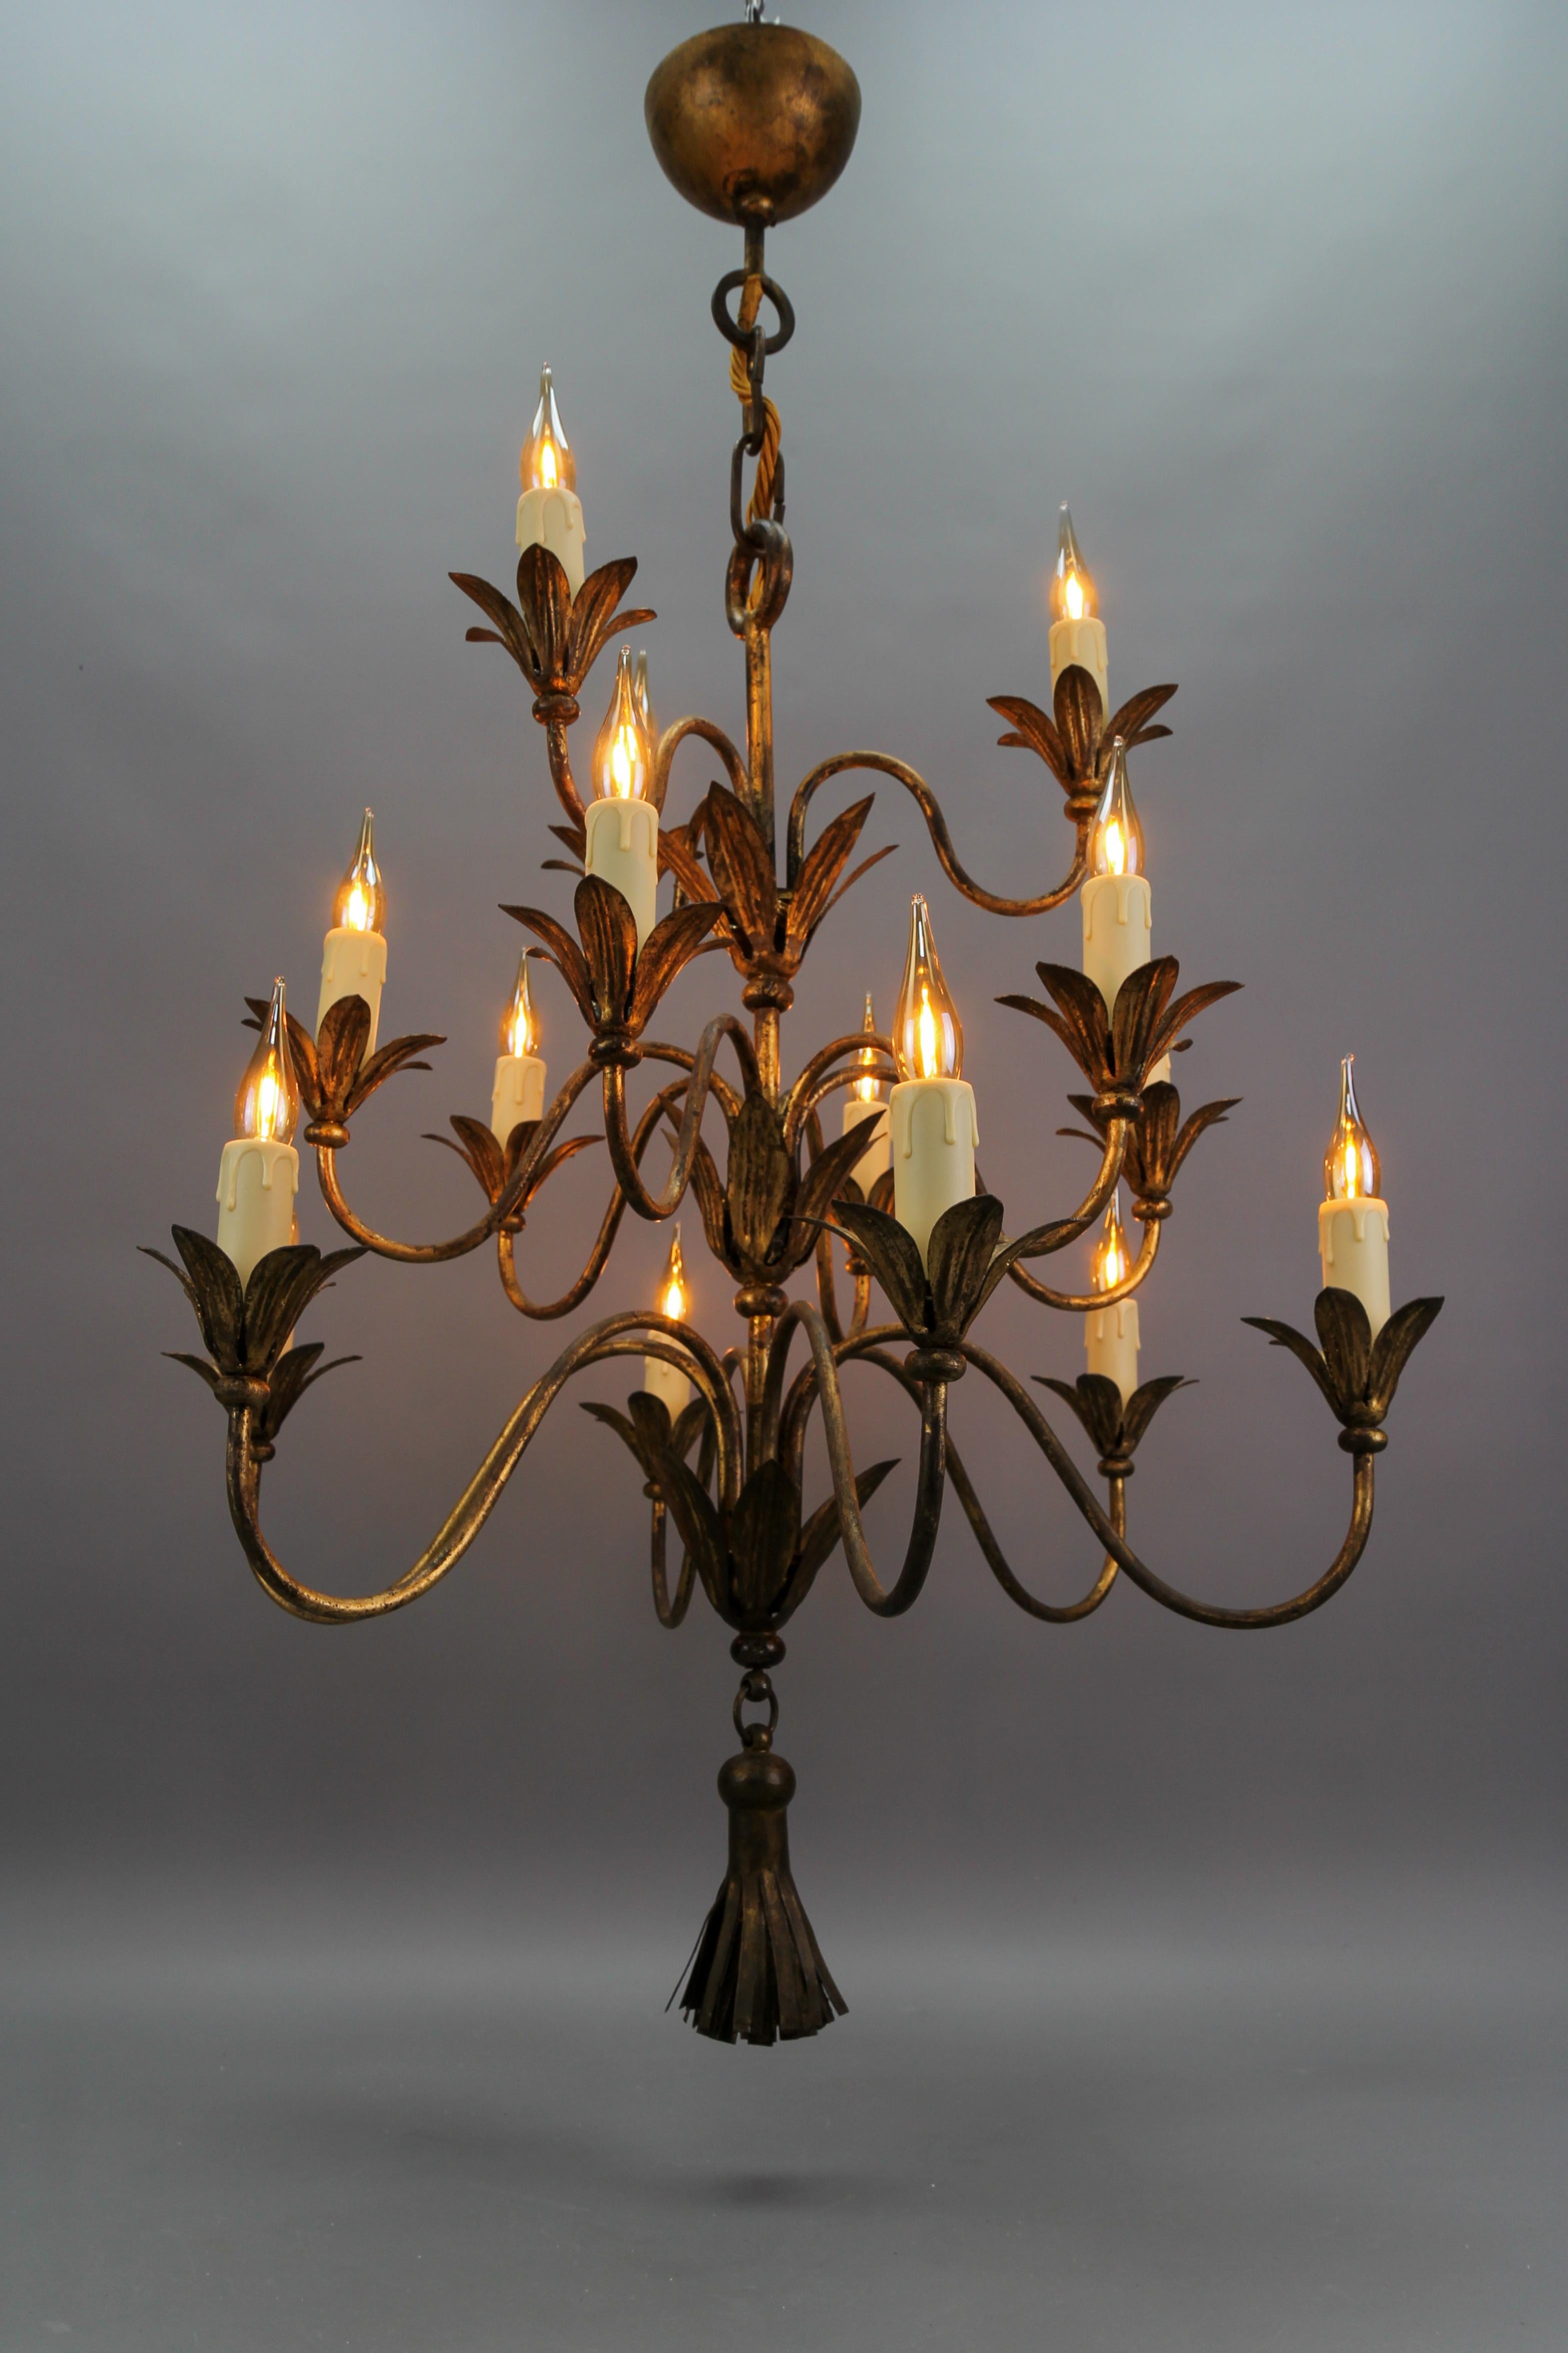 French gilt metal fifteen-light chandelier from ca. 1950s.
This impressive and rare French Hollywood Regency gilt metal chandelier features fifteen arms with flower-shaped bobeches and a gilt metal tassel in the center of the bottom of the